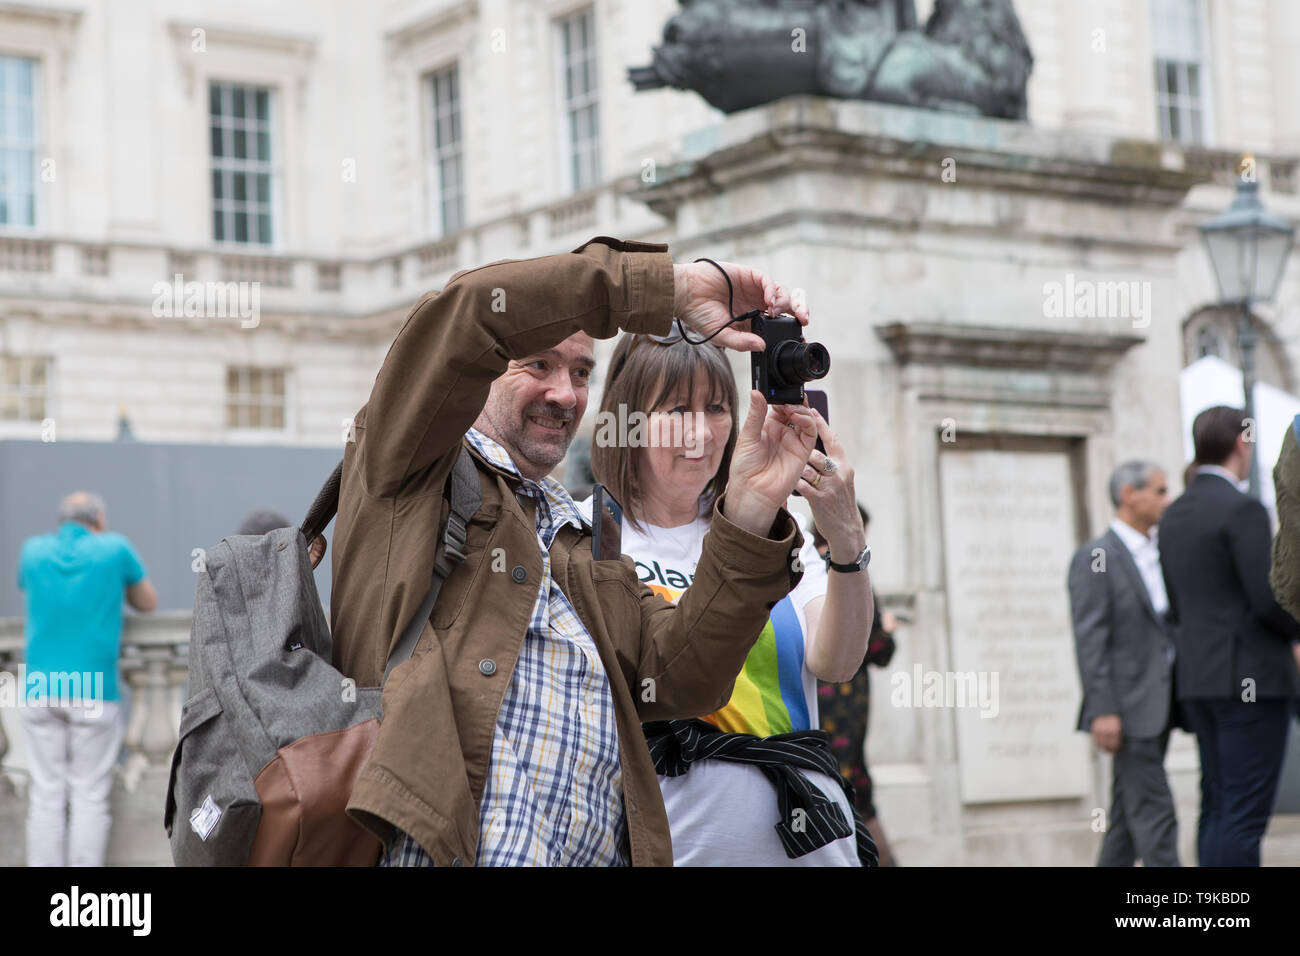 London, UK. 18 May 2019. Crowds attend the fifth edition of Photo London at Somerset House. Over 100 galleries from 24 different countries showcase the work of past, present and future leading artists in photography. A Master of Photography exhibition dedicated to US photographer Stephen Shore.  An installation takes the theme of Women in Photography, celebrating the work of three established women photographers – Rachel L. Brown, Mary McCartney and Susan Meiselas. A discovery section focus on new and emerging talent. Stock Photo